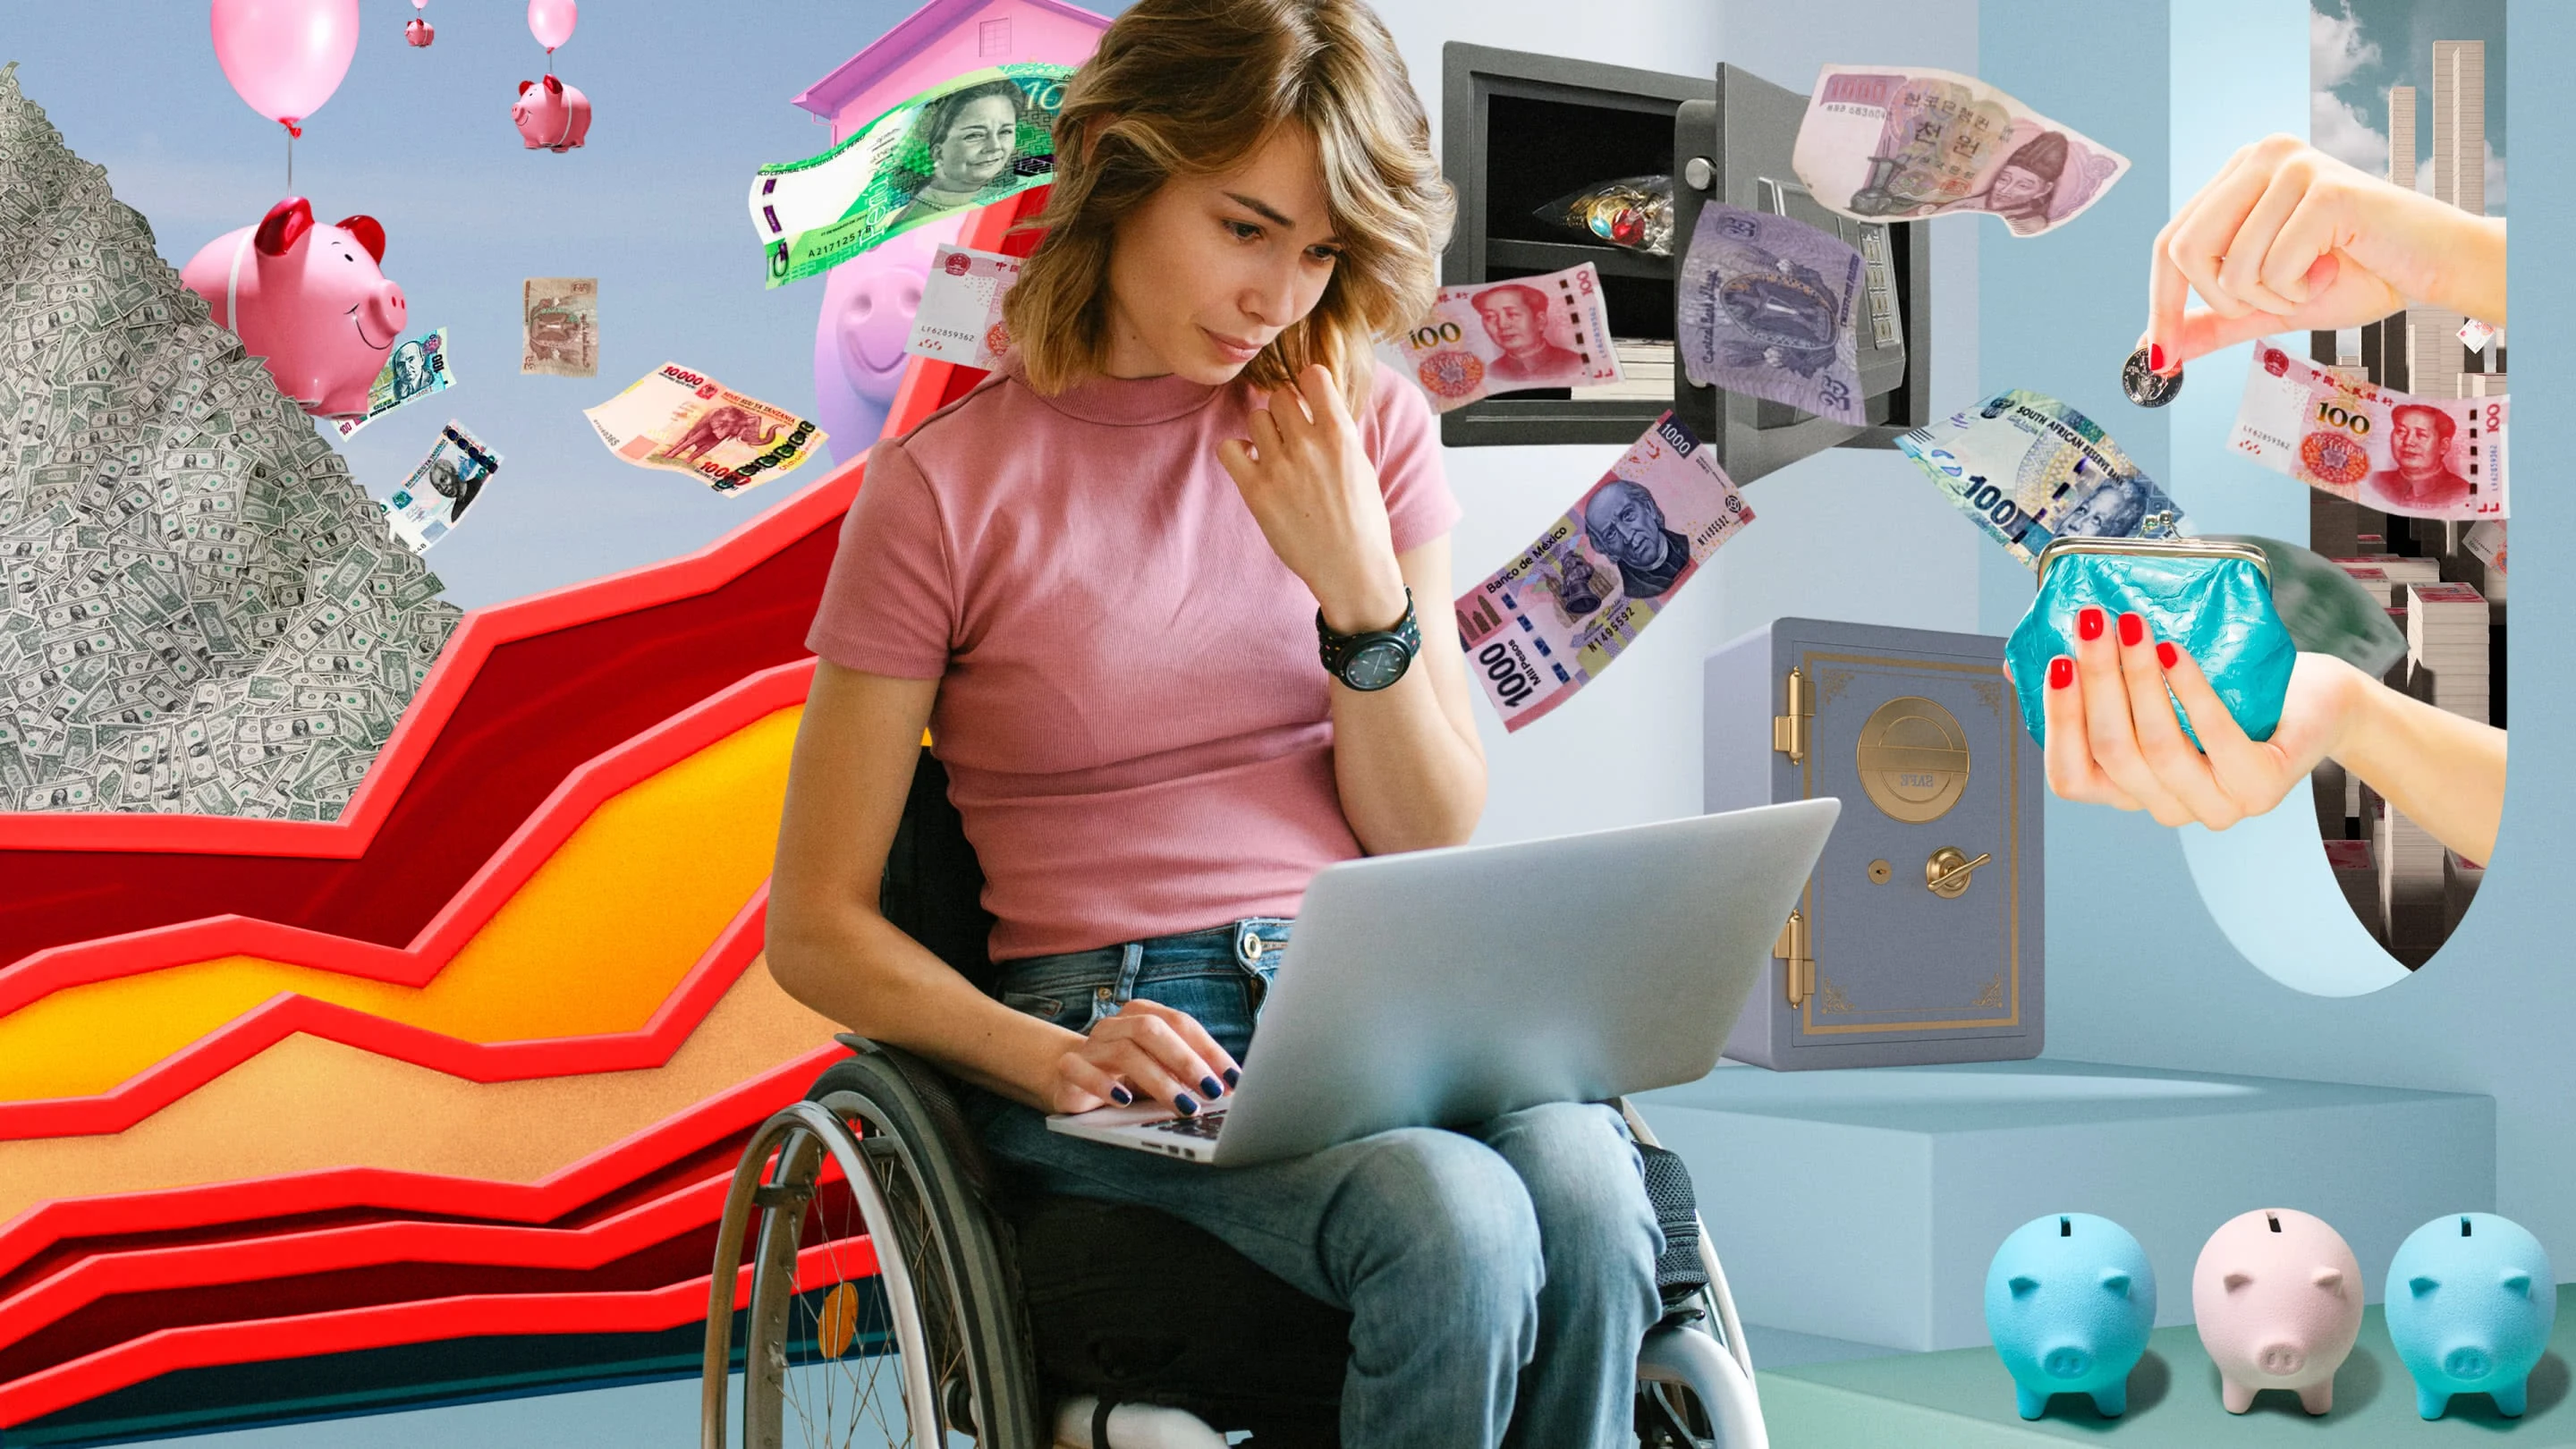 Collage of financial themes. White woman in a wheelchair at center, working on a laptop. Red lines of an abstract line graph at left. Floating banknotes from different currencies and countries. Small pastel piggy banks.